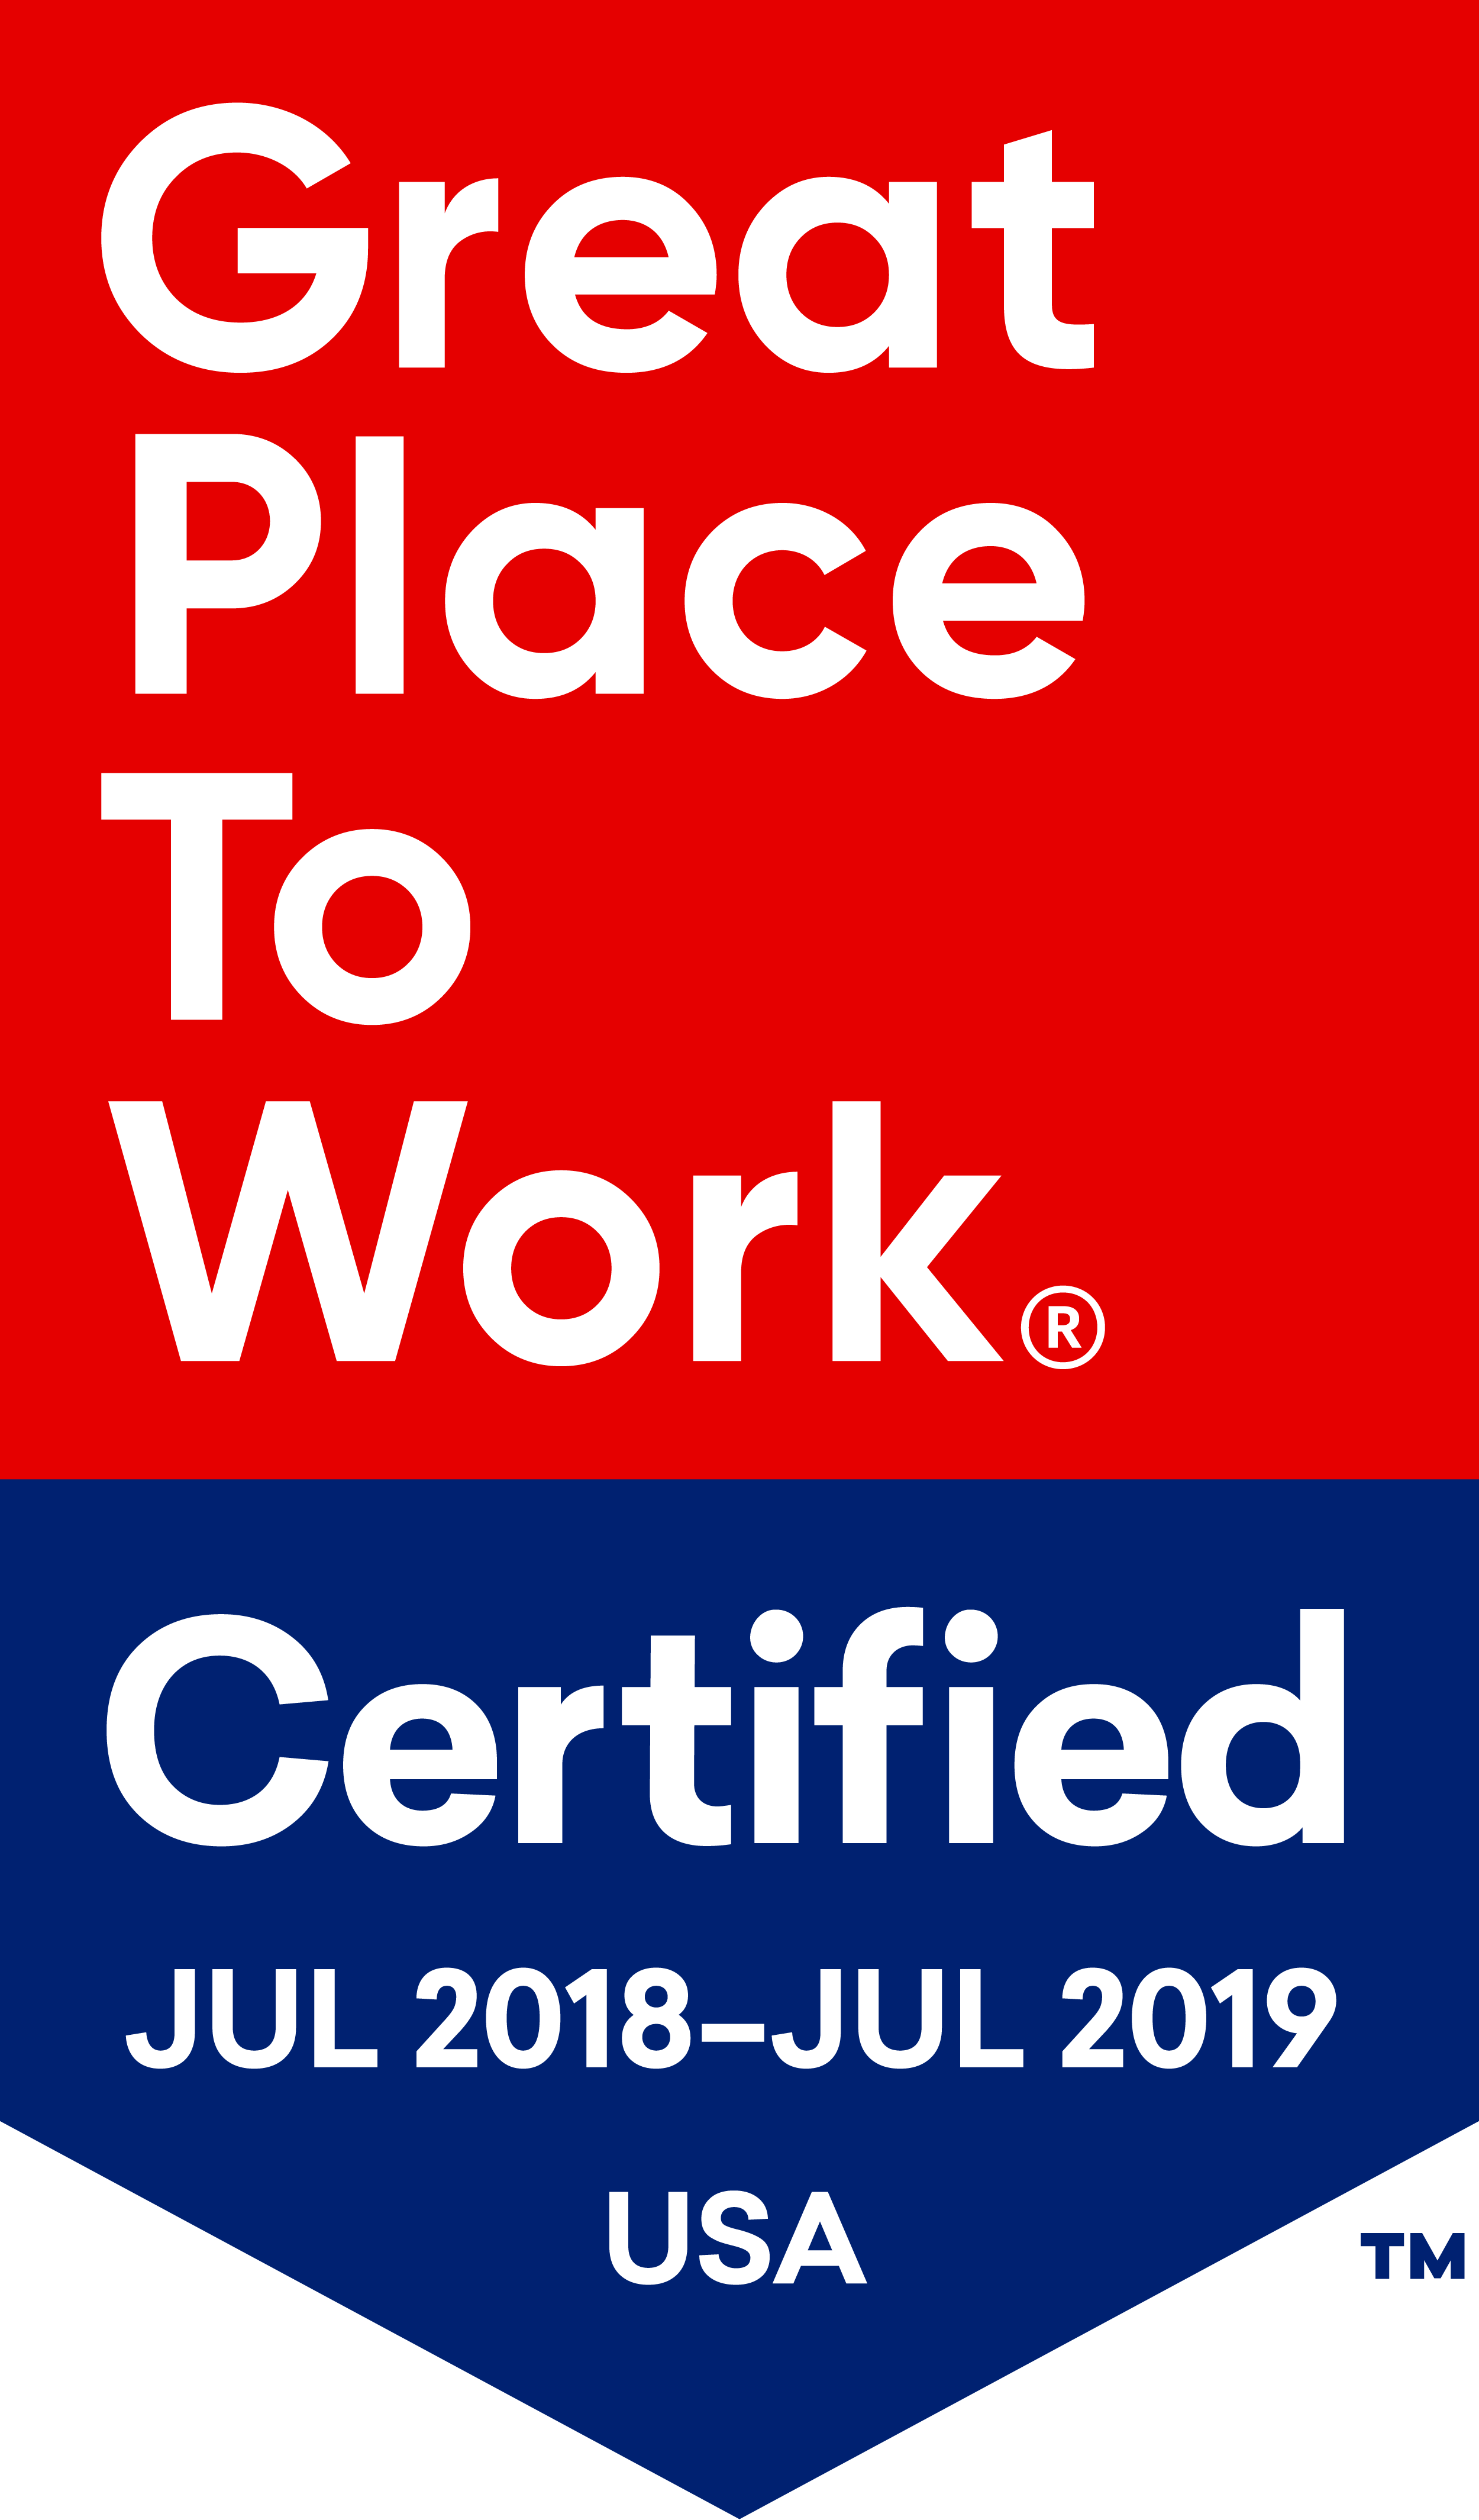 Great Place to Work Certified July 2018-July 2019